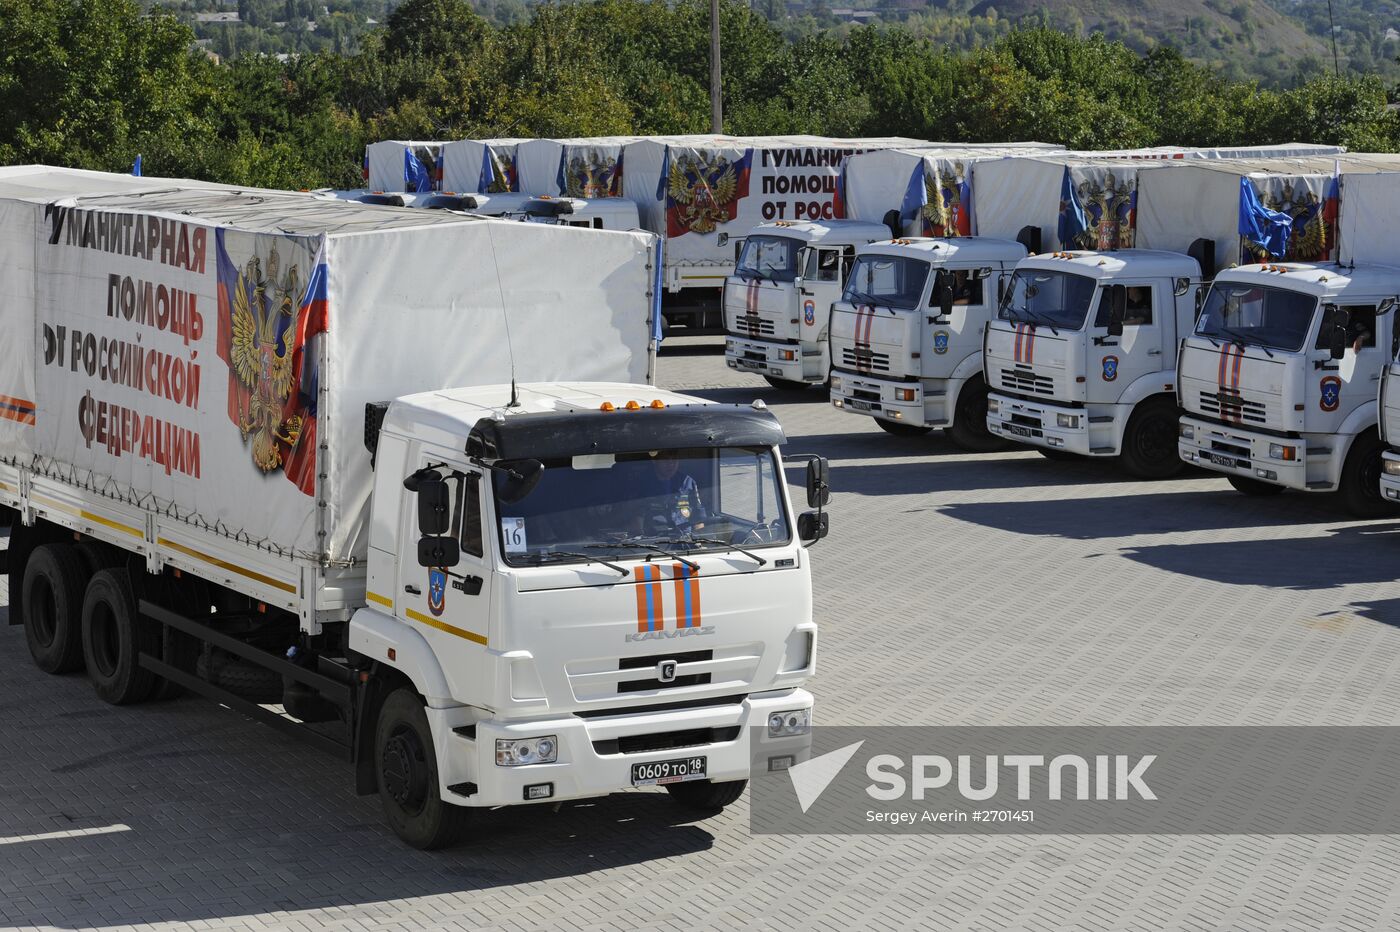 Russia's 38th humanitarian aid convoy arrives in Donetsk Region